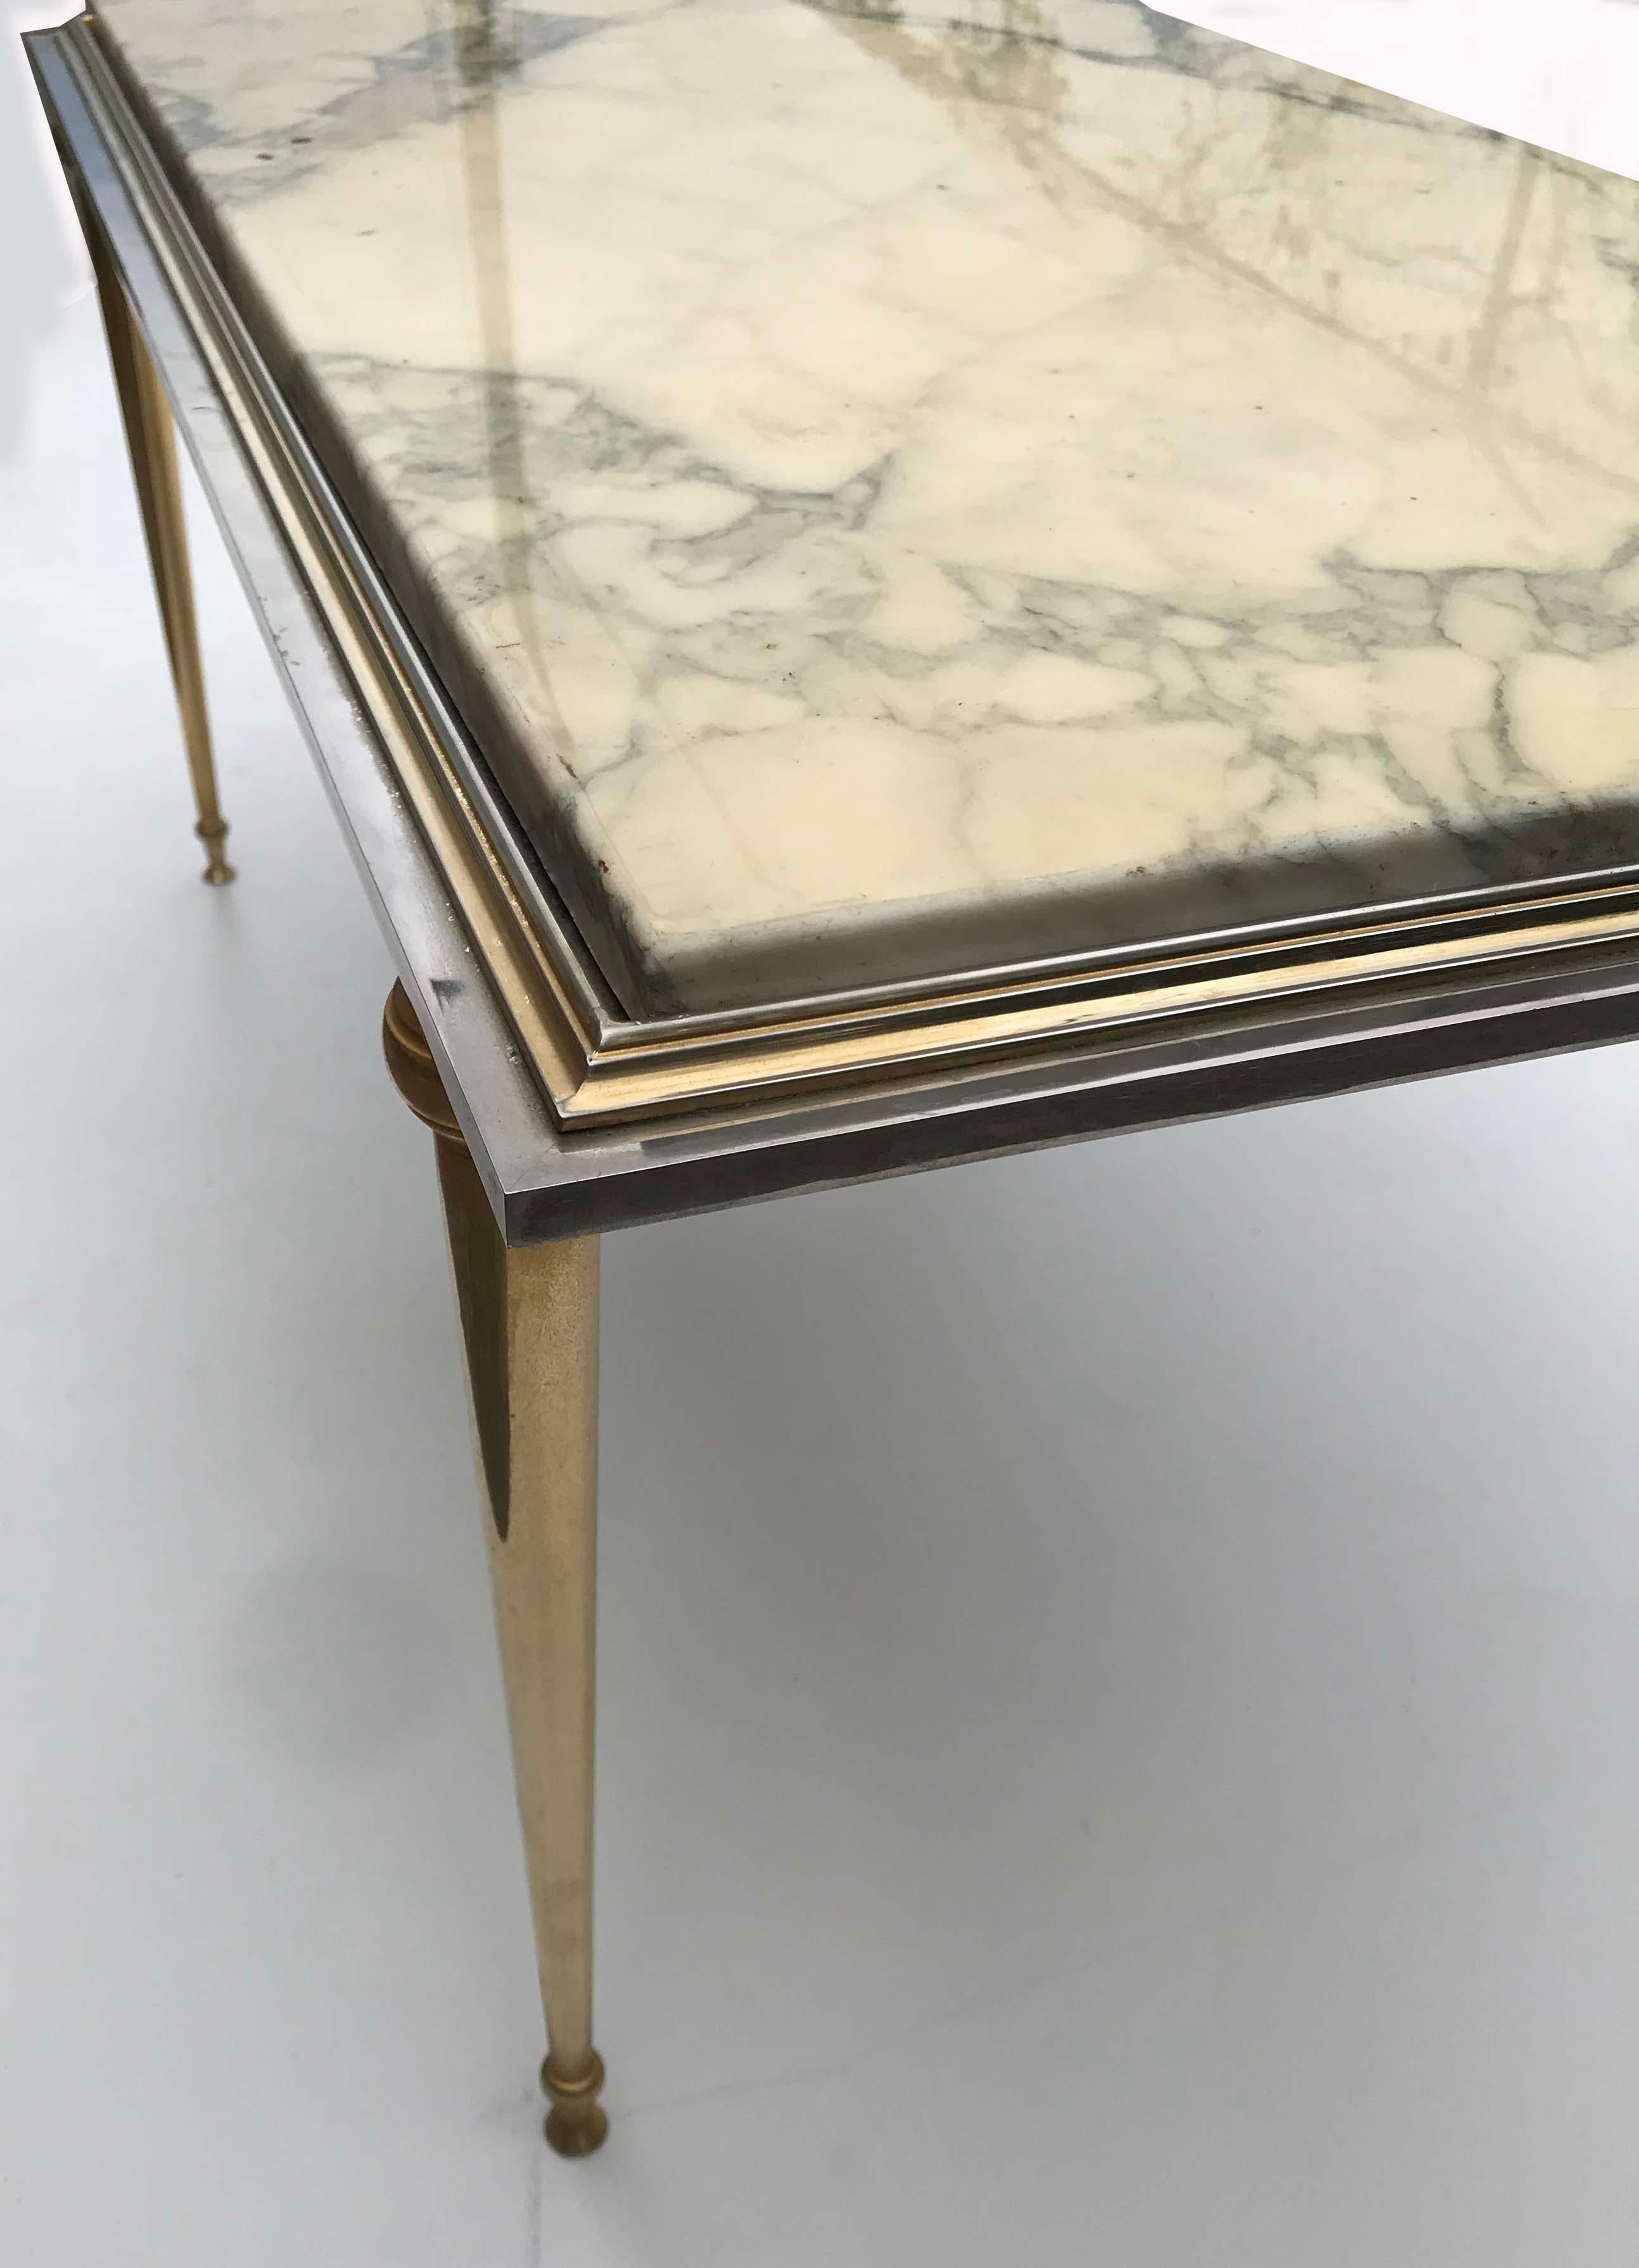 Superb Maison Jansen two patinas coffee table, doré bronze and steel. Top is an Italian Carrara marble,
heavy and sturdy.
Very good original condition.